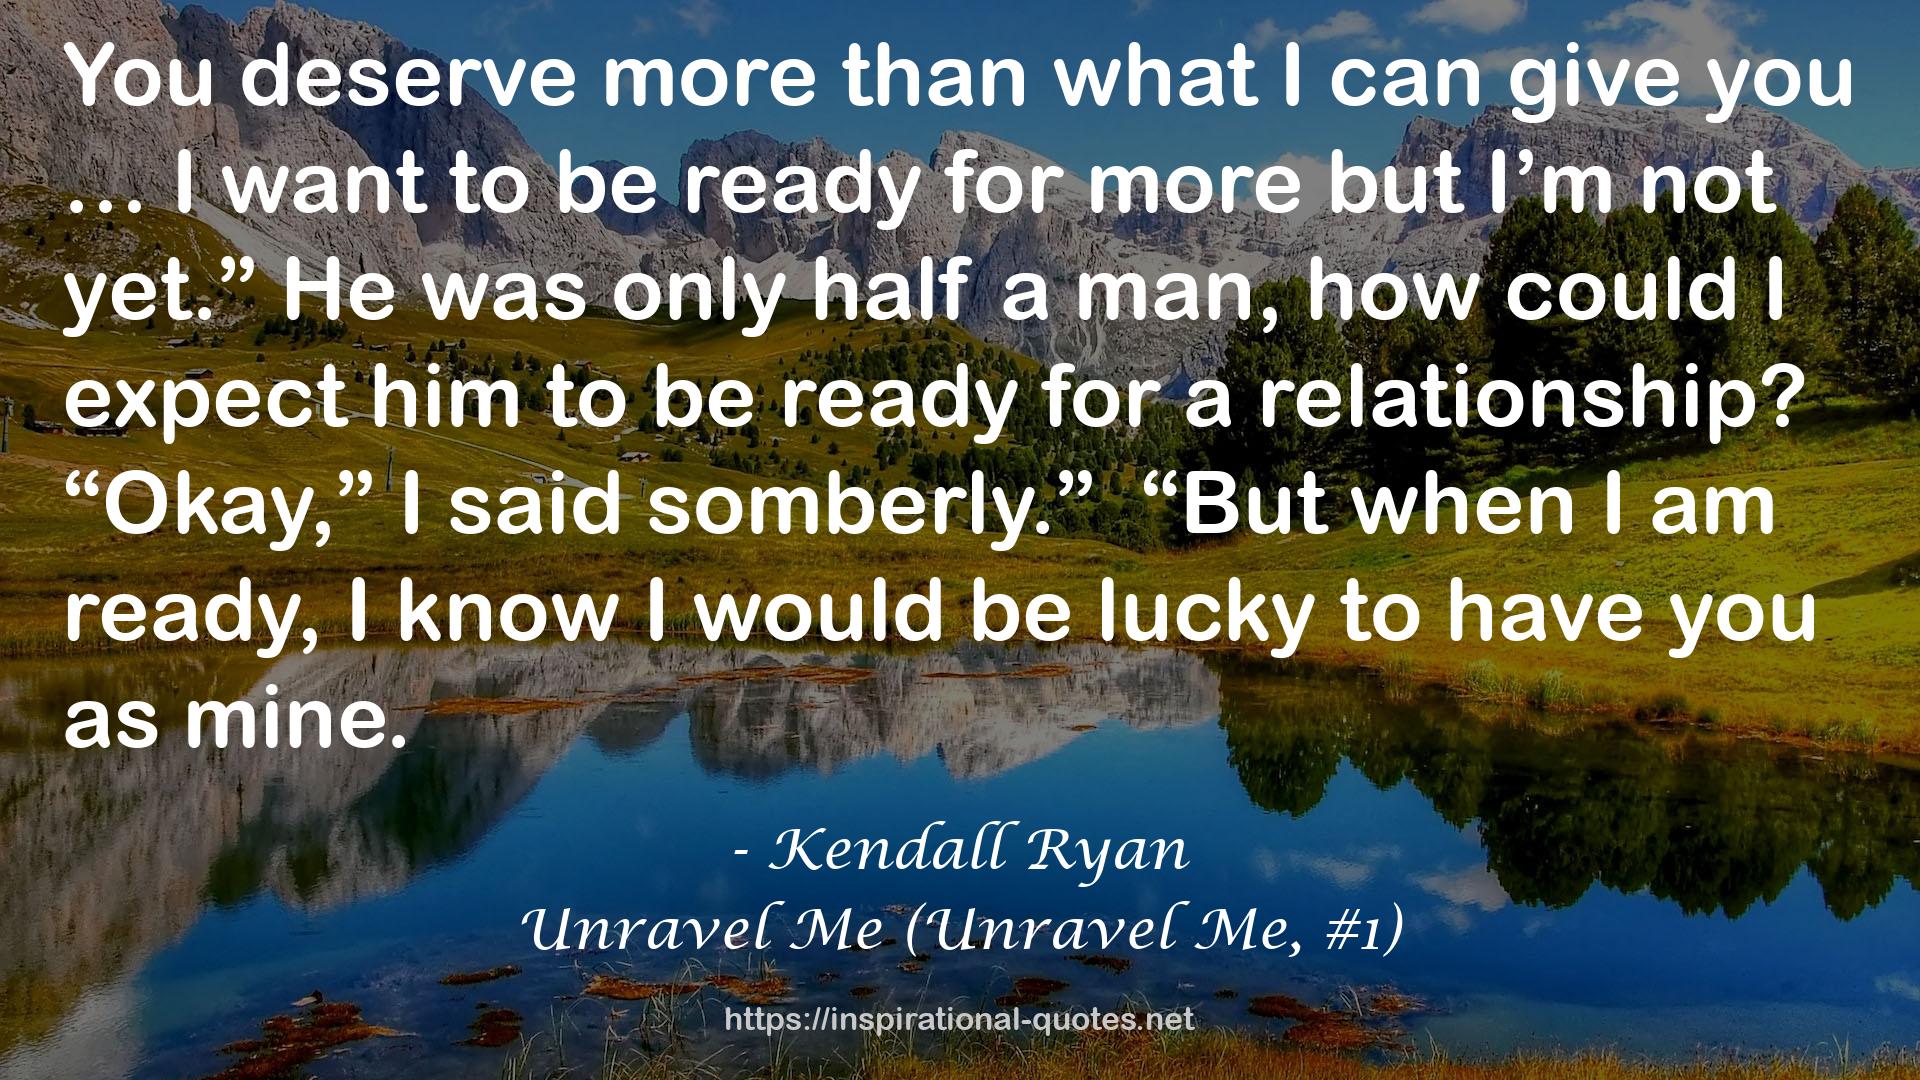 Kendall Ryan QUOTES